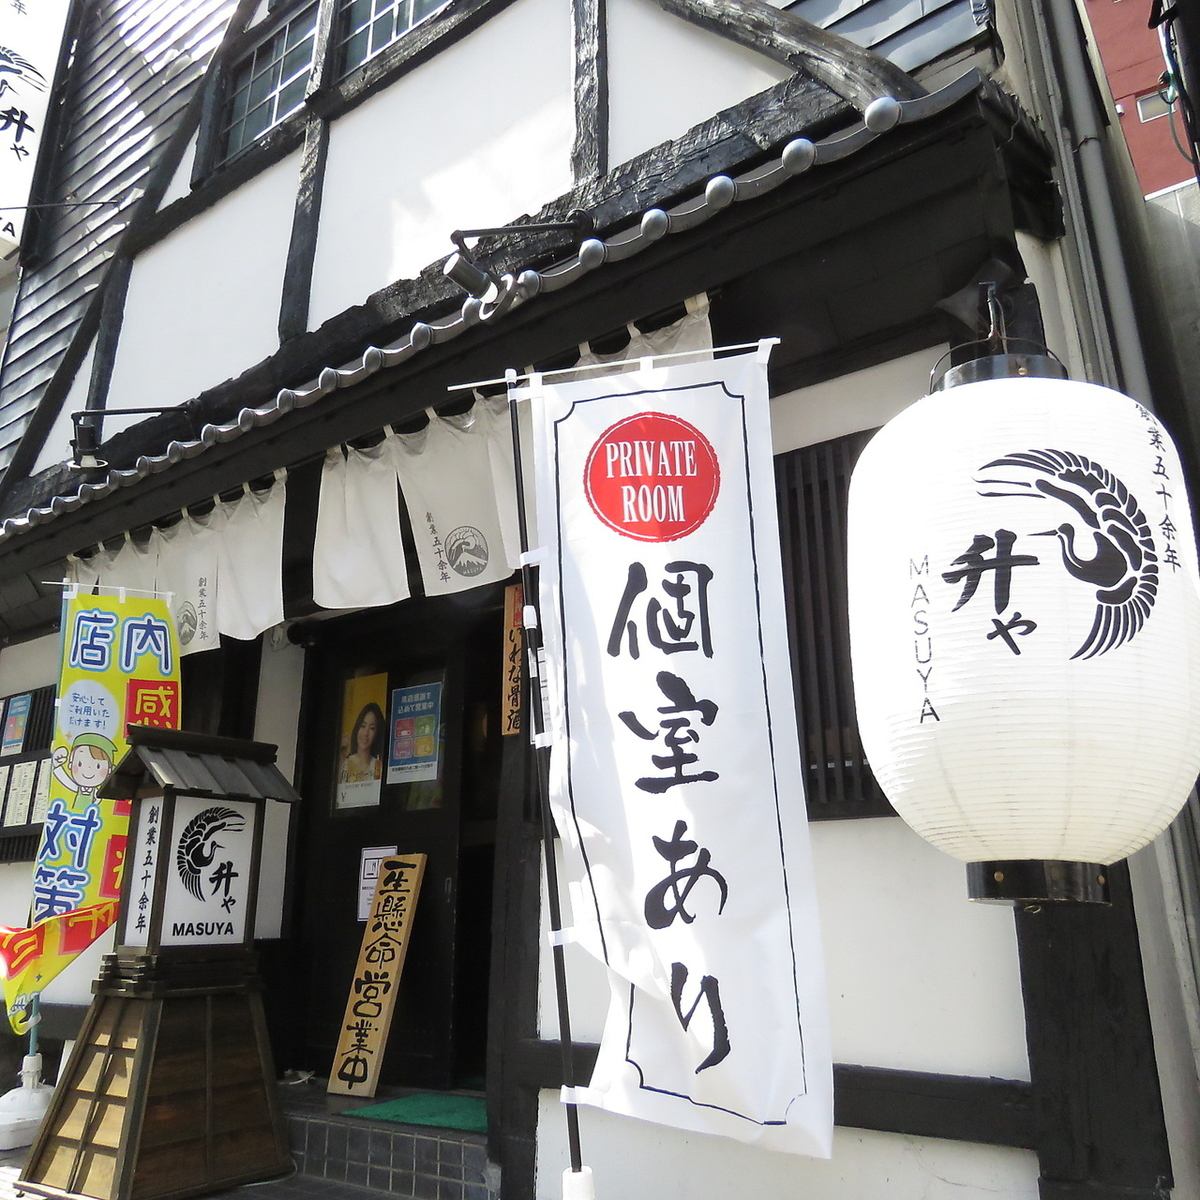 5 minutes walk from Chiba station! This lantern is a landmark! Counter seats available!